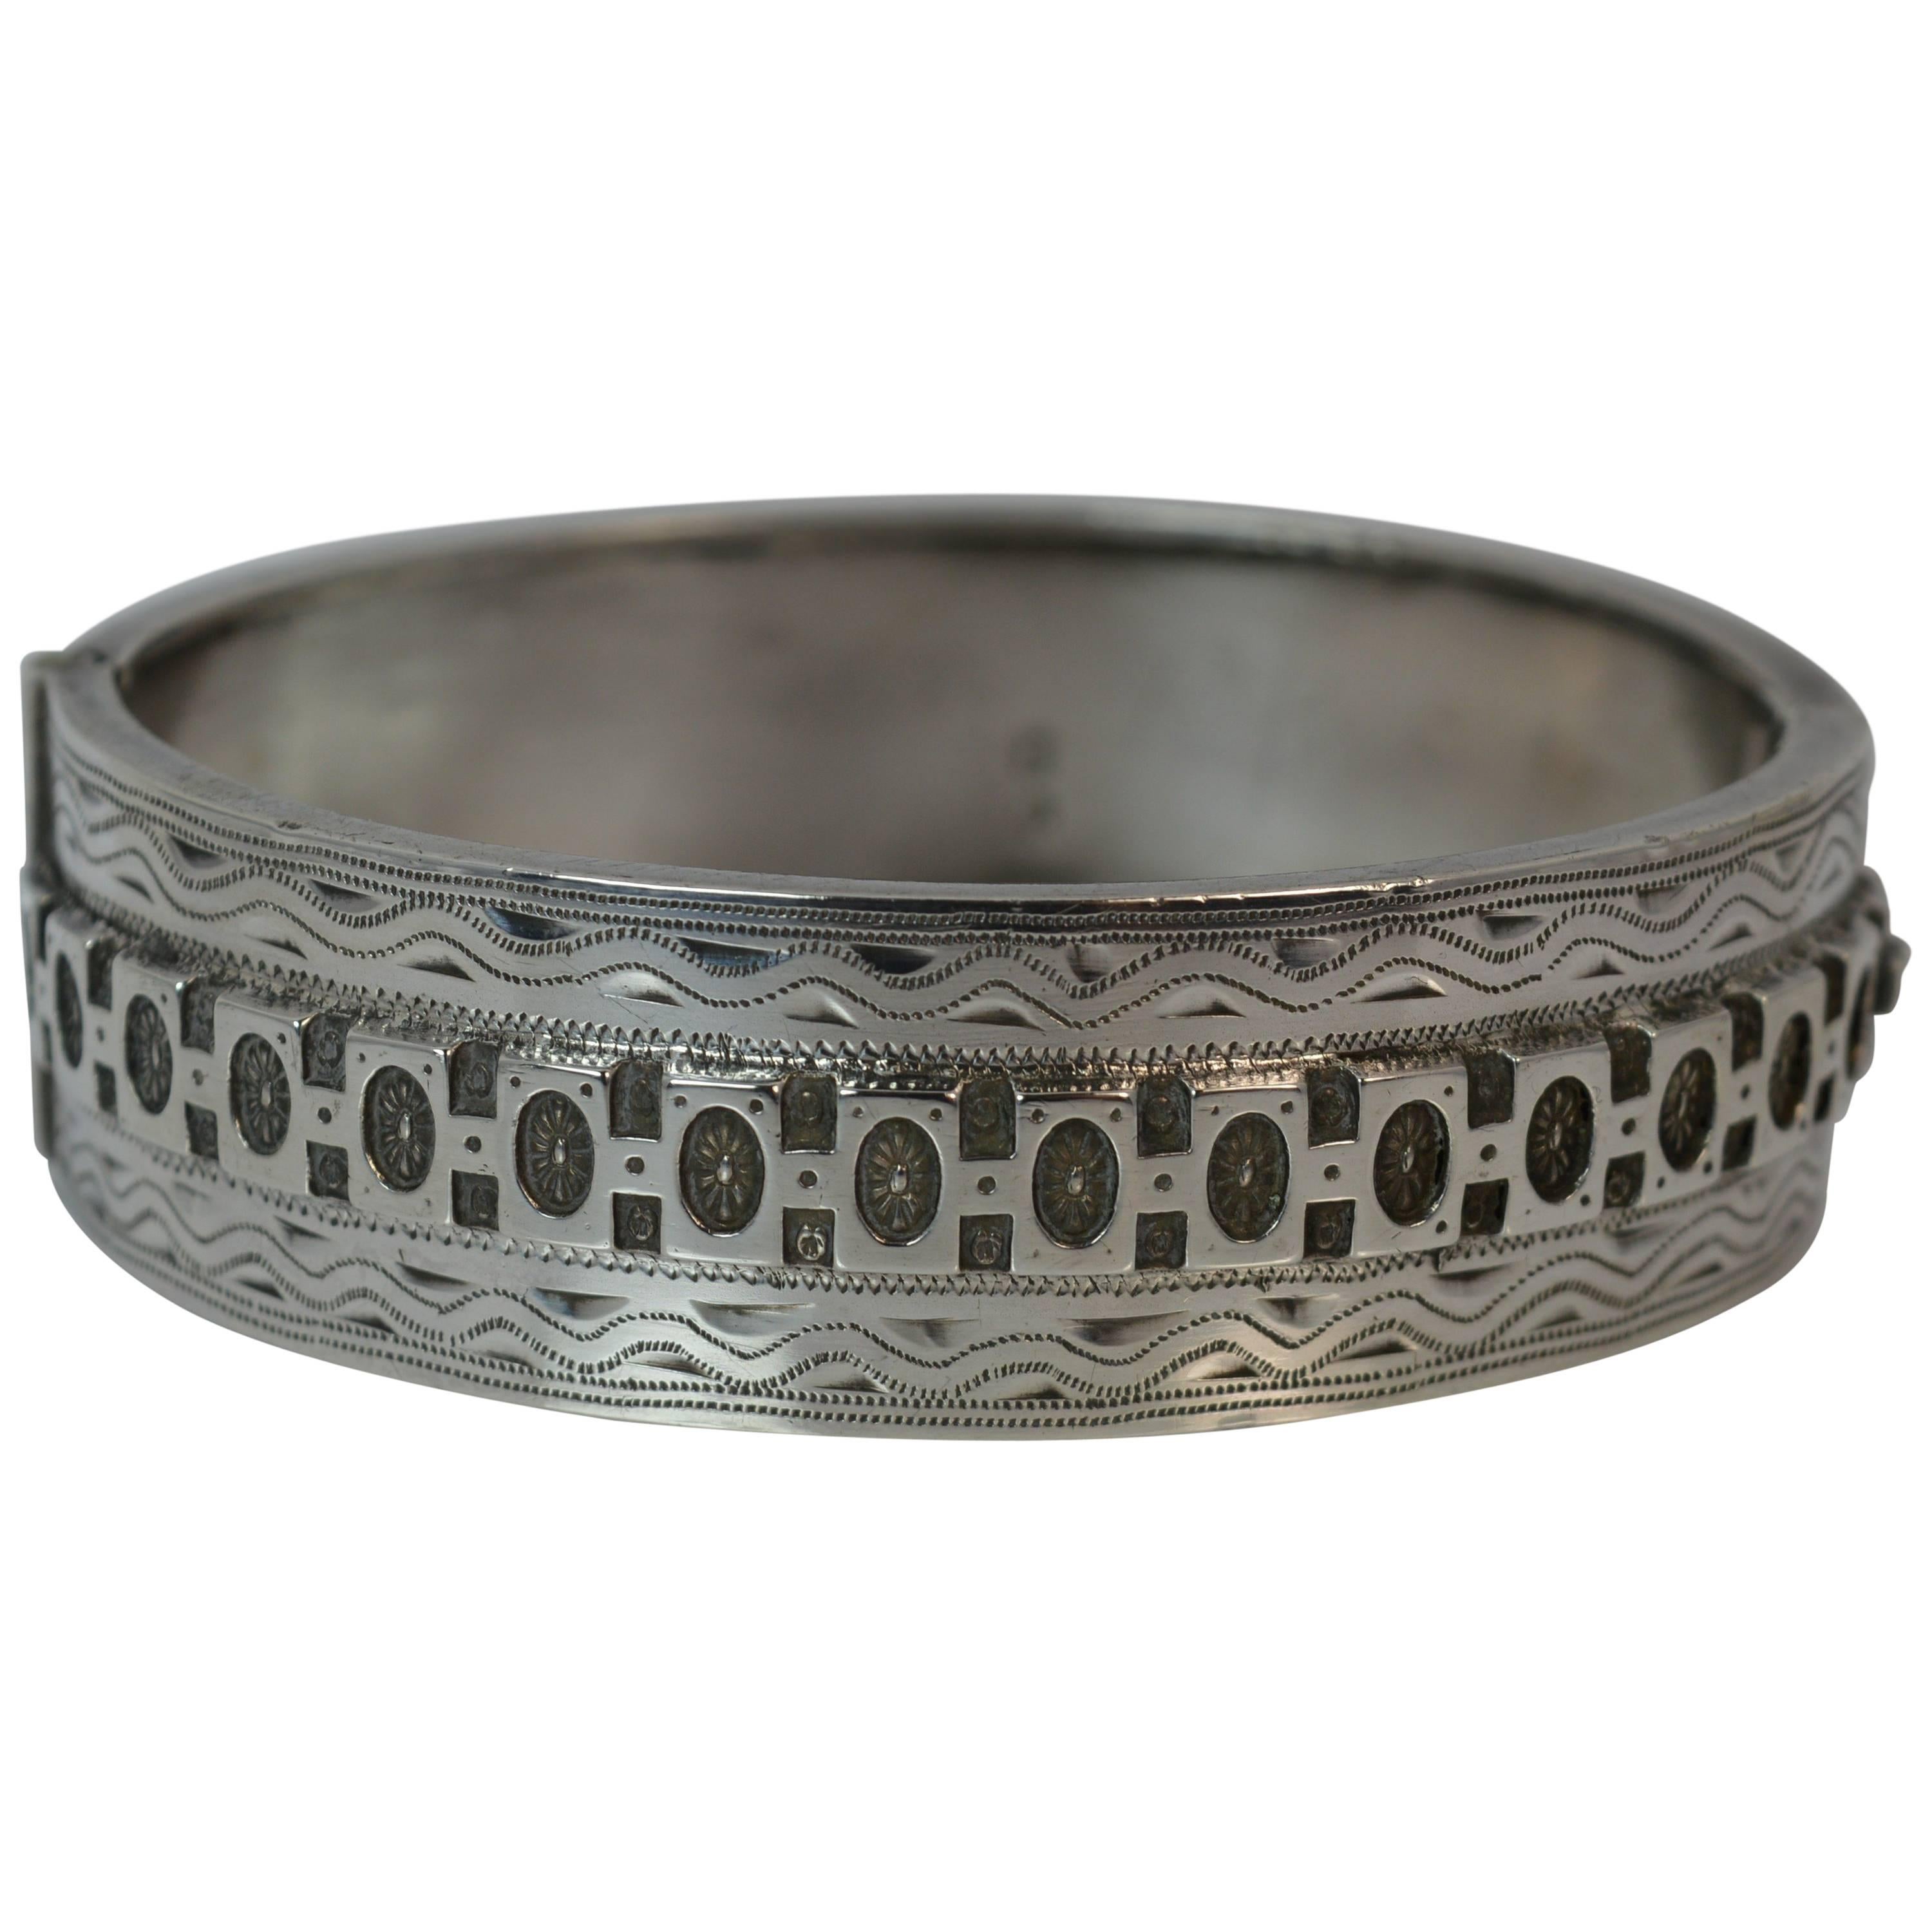 1884 Victorian Aesthetic Period Solid Silver Bangle